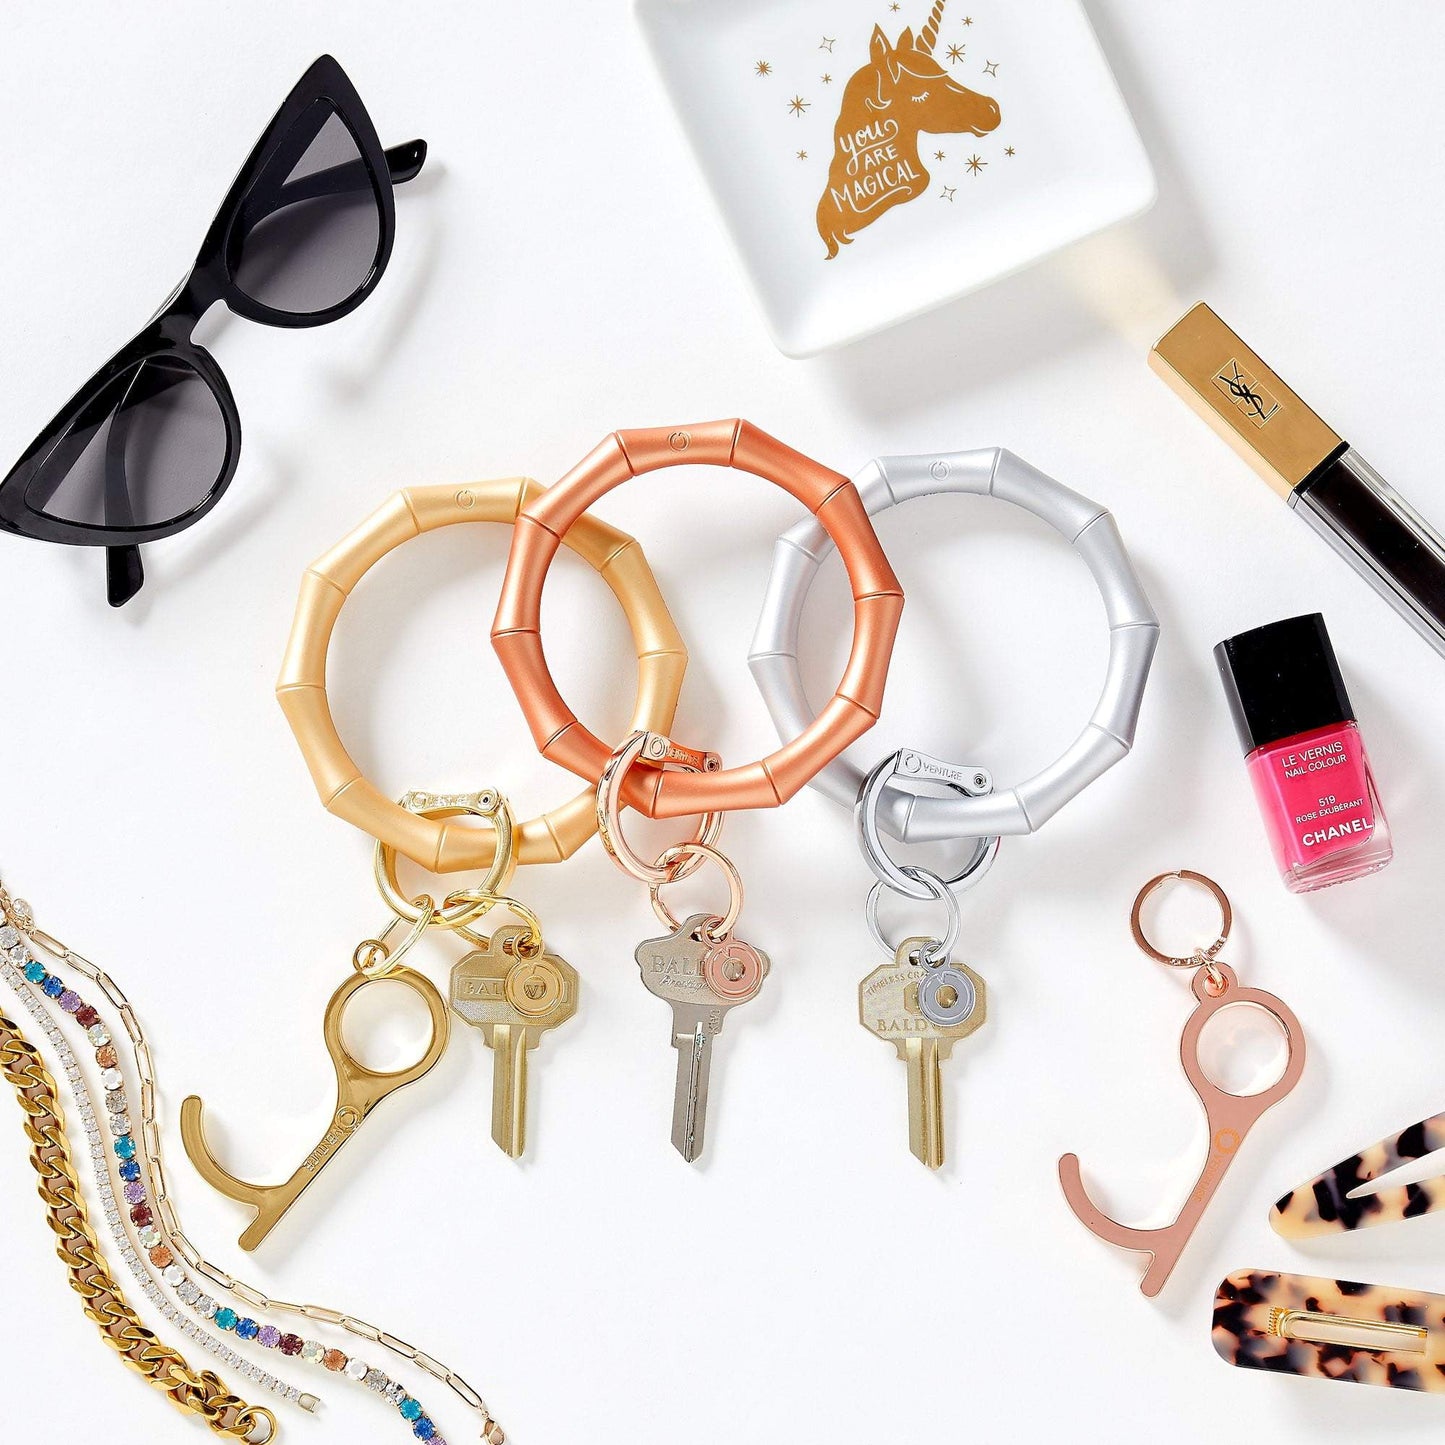 Bamboo Collection - Silicone Big O Key Ring - The Street Boutique 